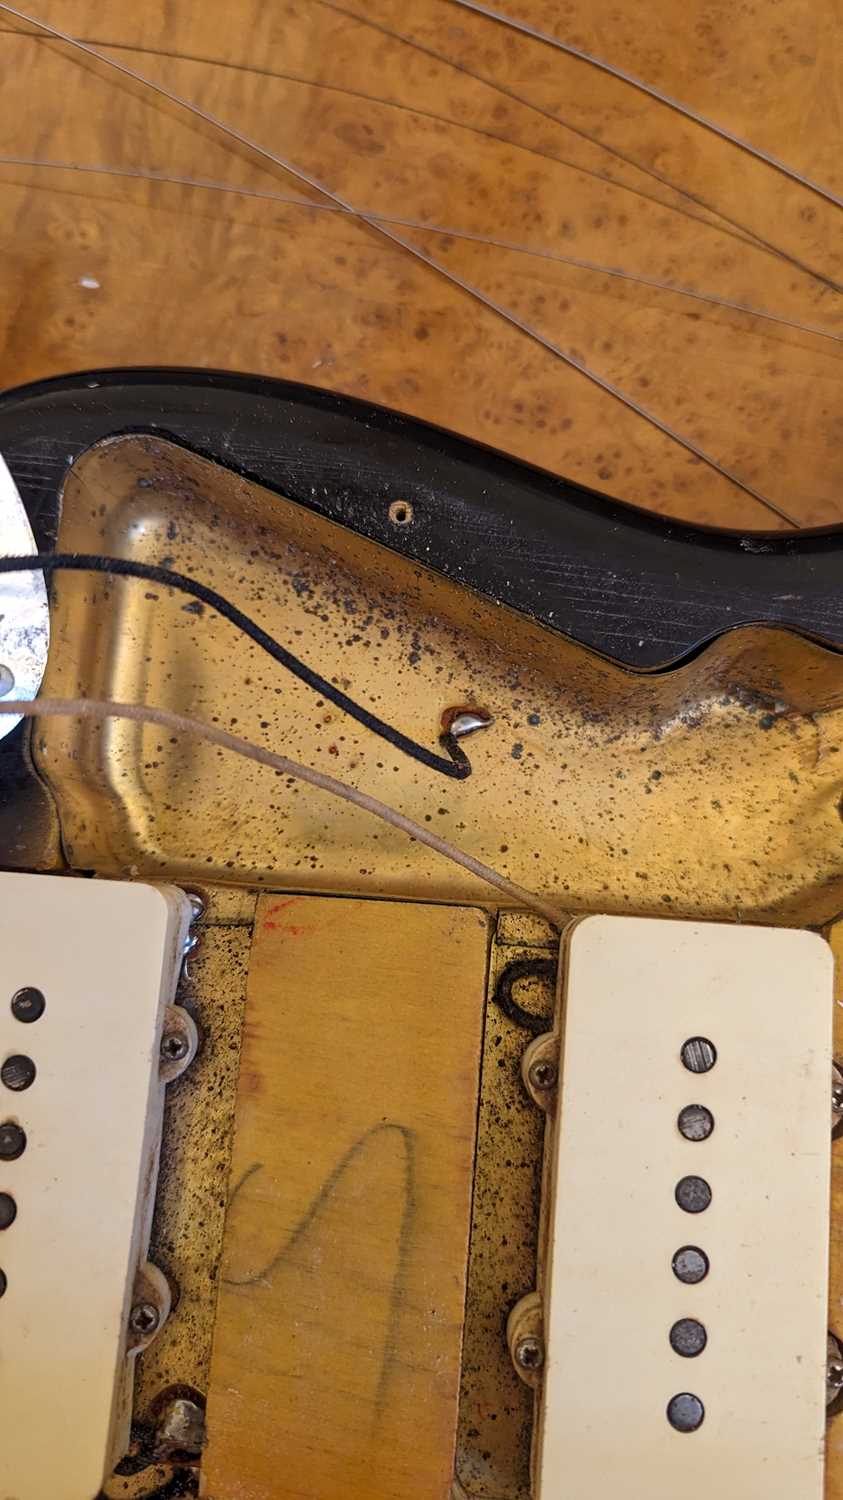 A 1965 Fender Jazzmaster electric guitar, - Image 10 of 16